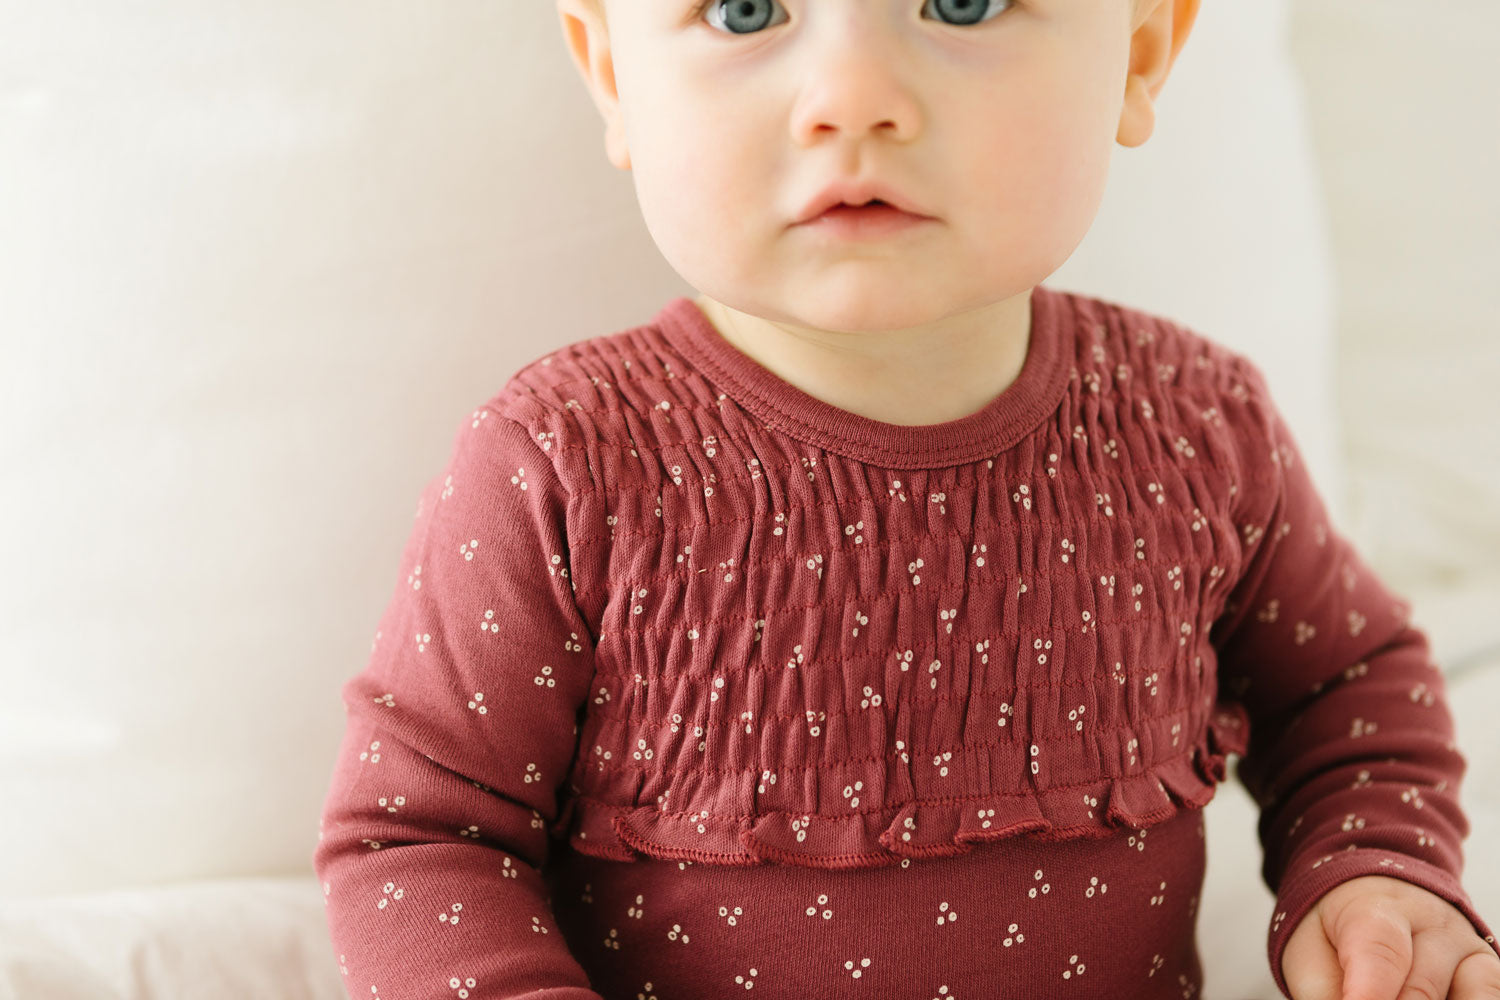 L'ovedbaby Organic Smocked Baby Footie - Appleberry Dots